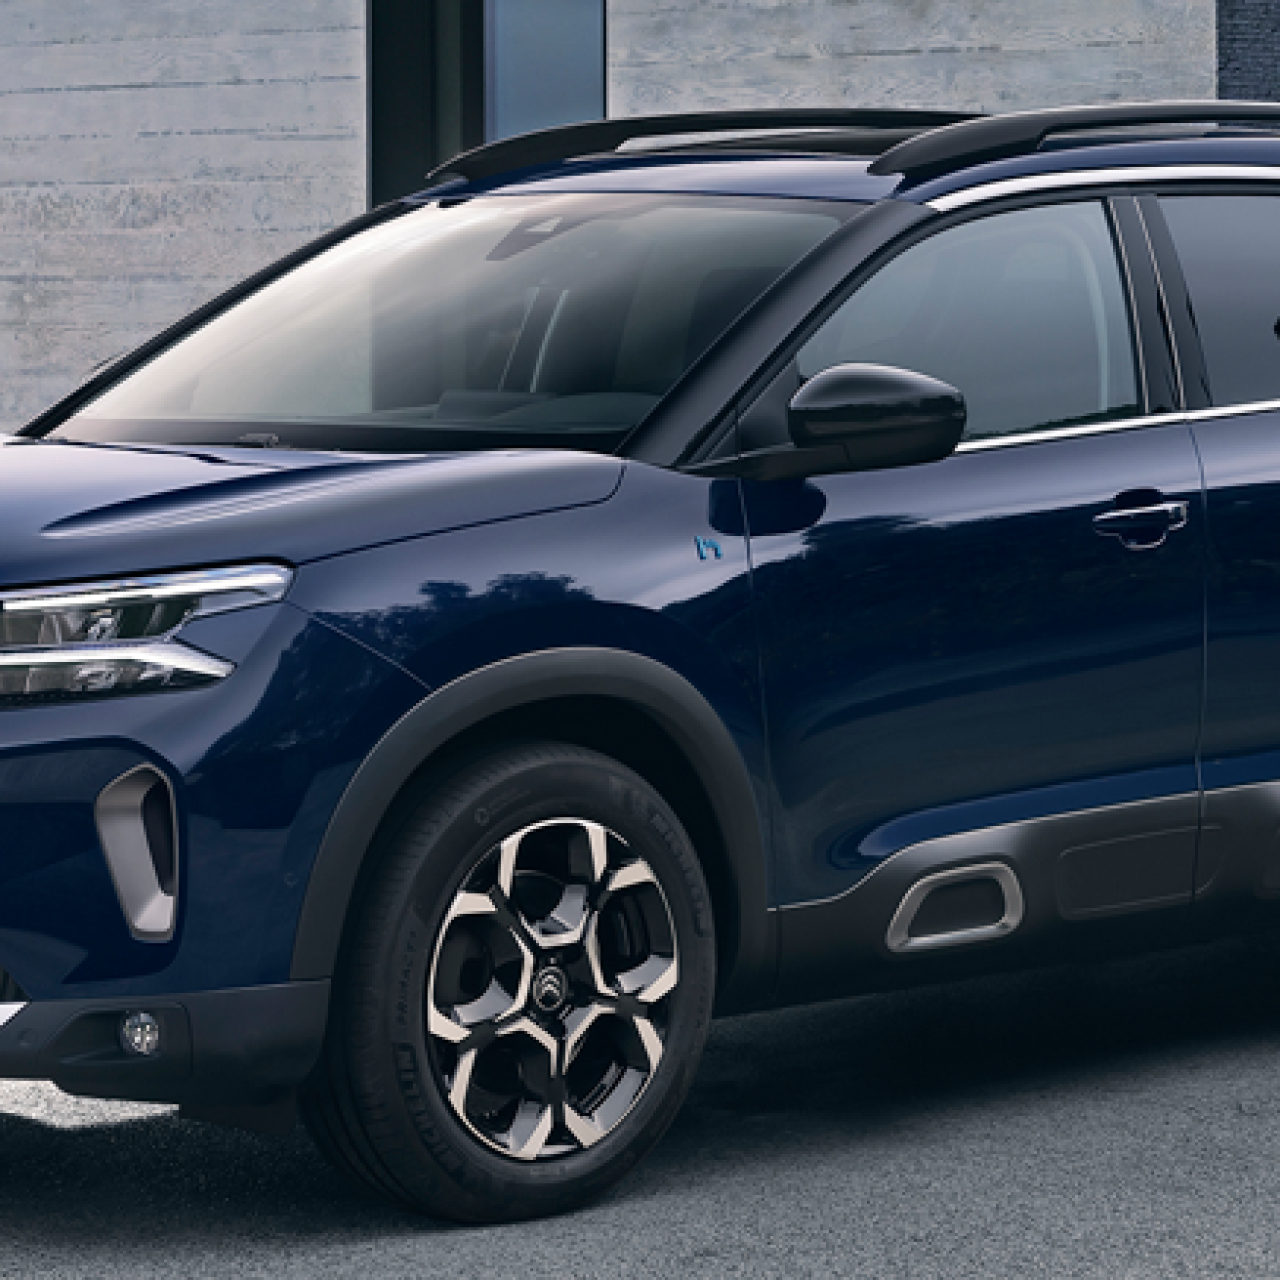 Citroen C5 Aircross Facelift is the first PHEV in the Citroen line up